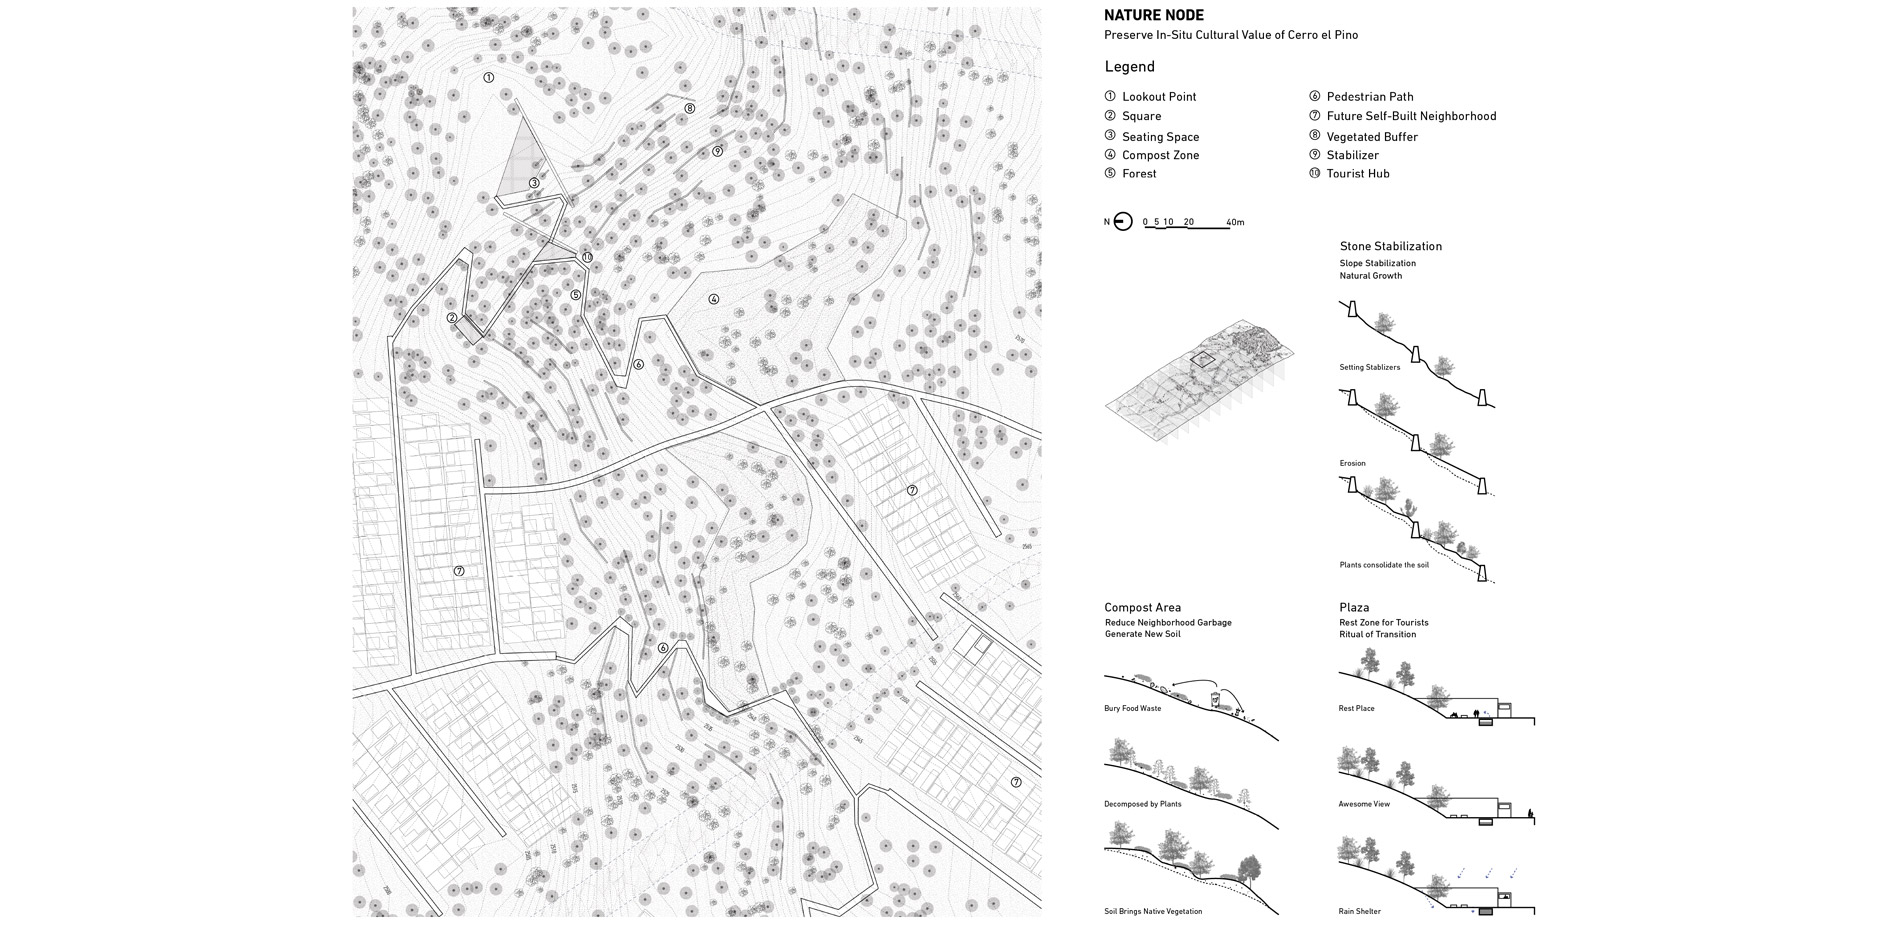 It illustrates the site plan of the nature node and diagrams of interventions.…